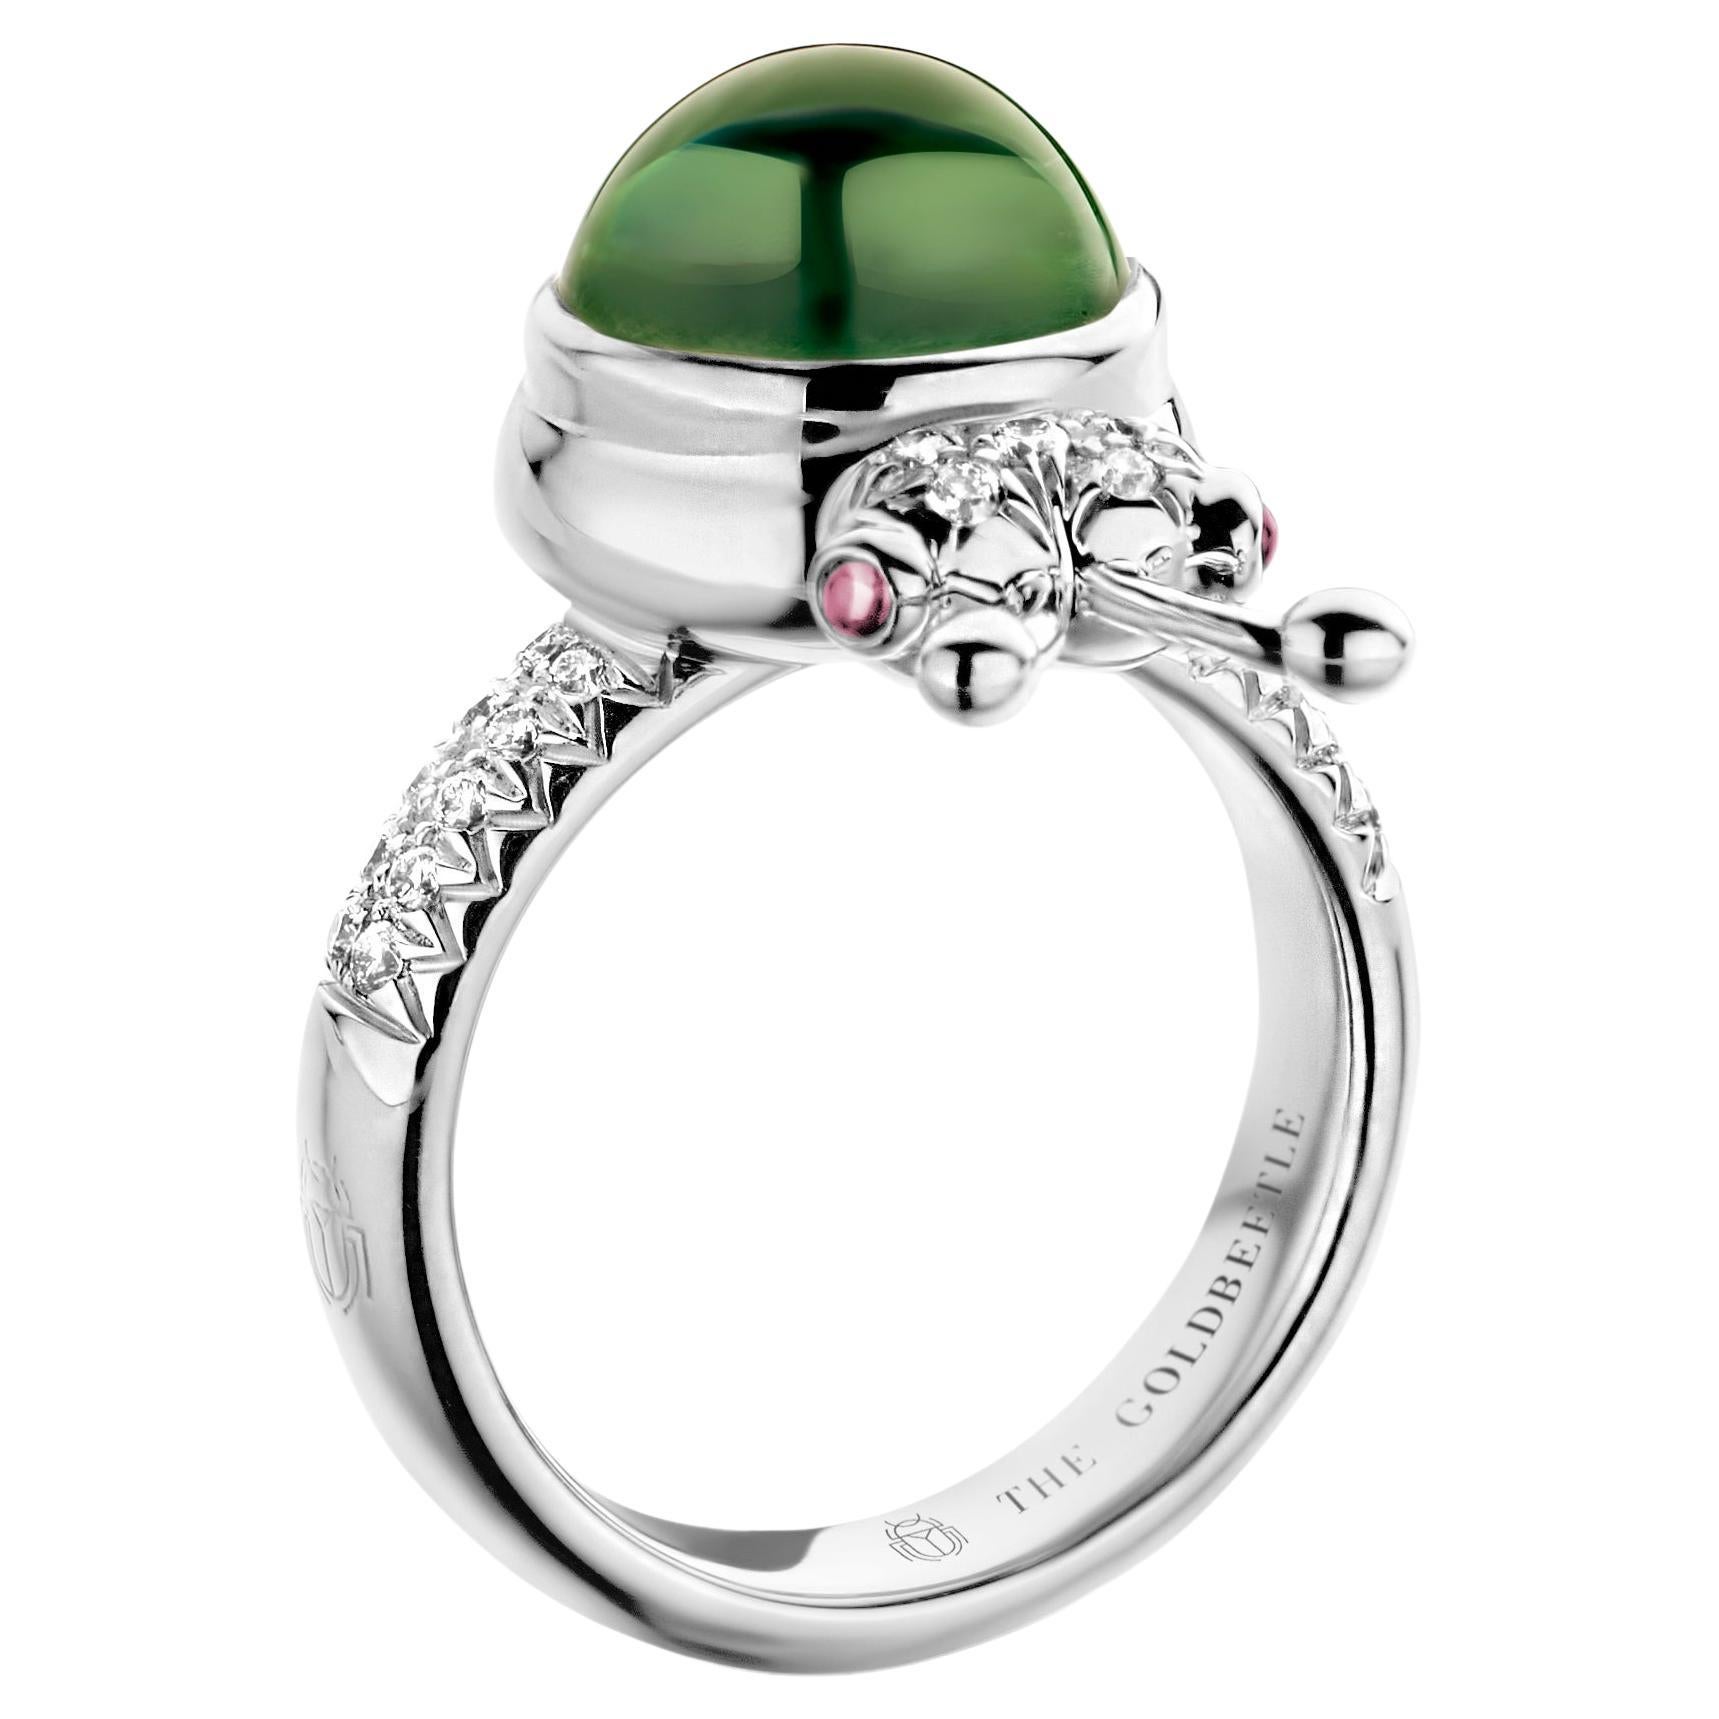 One-of-a-kind lucky beetle ring in 18-Karat white gold 10g set with the finest natural diamonds in brilliant cut 0,23 Carat (VVS/DEF quality) one natural, green tourmaline in round cabochon cut 6,00 Carat and two pink tourmalines in round cabochon